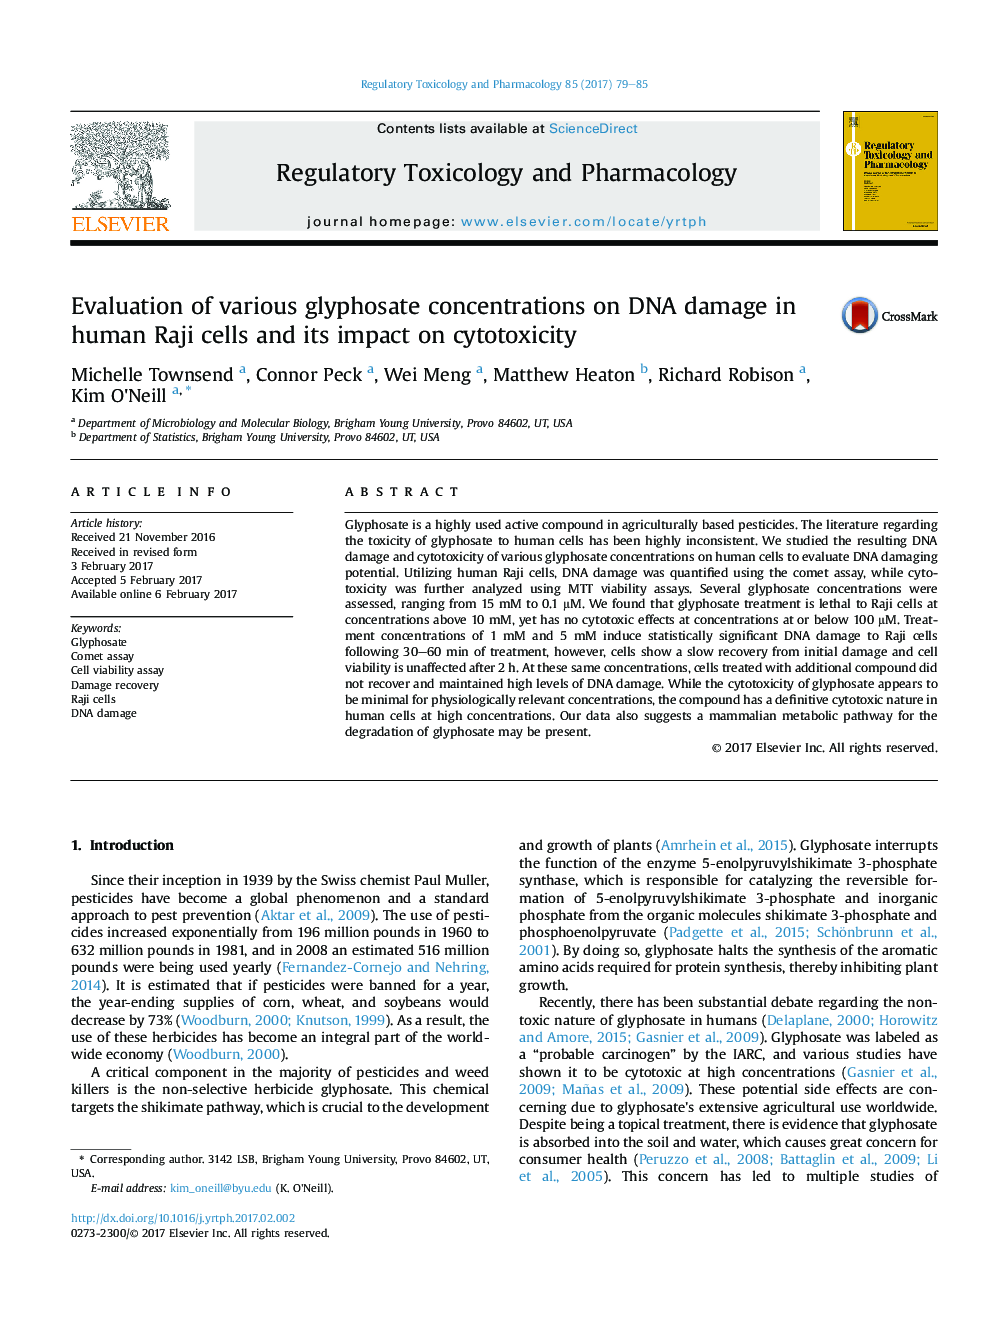 Evaluation of various glyphosate concentrations on DNA damage in human Raji cells and its impact on cytotoxicity